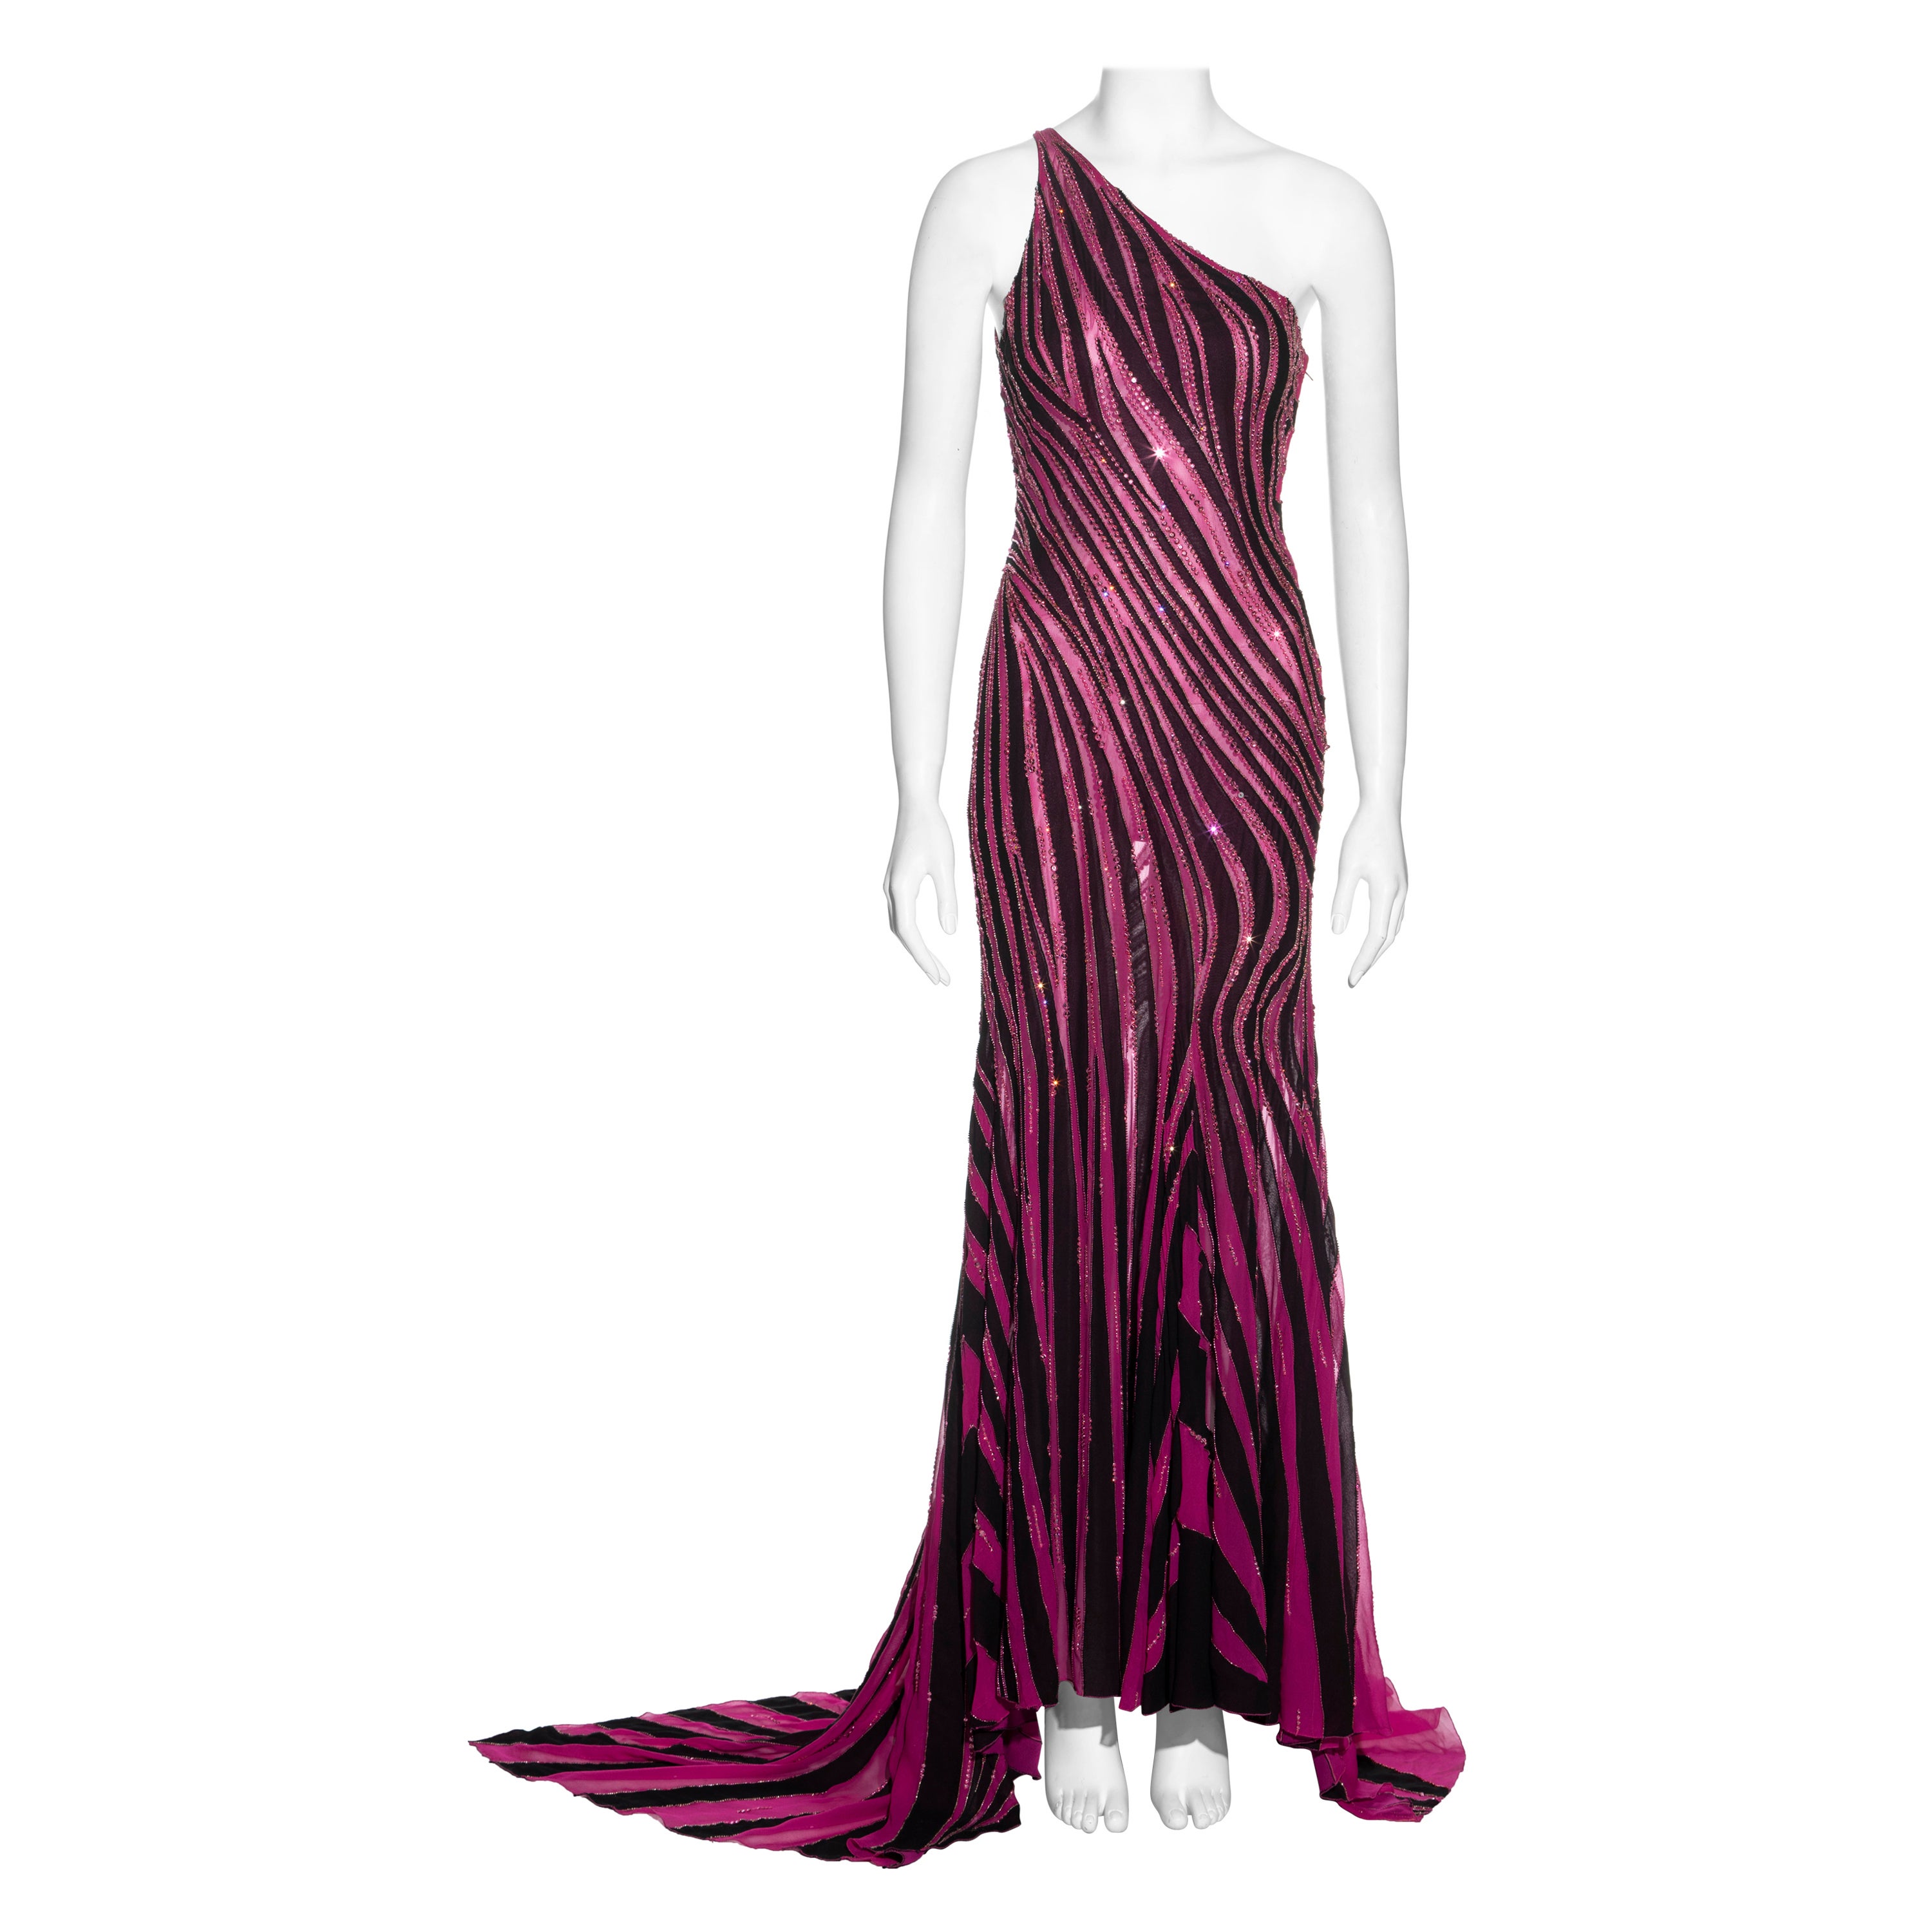 Atelier Versace Couture pink and black embellished evening dress, ss 2001 For Sale